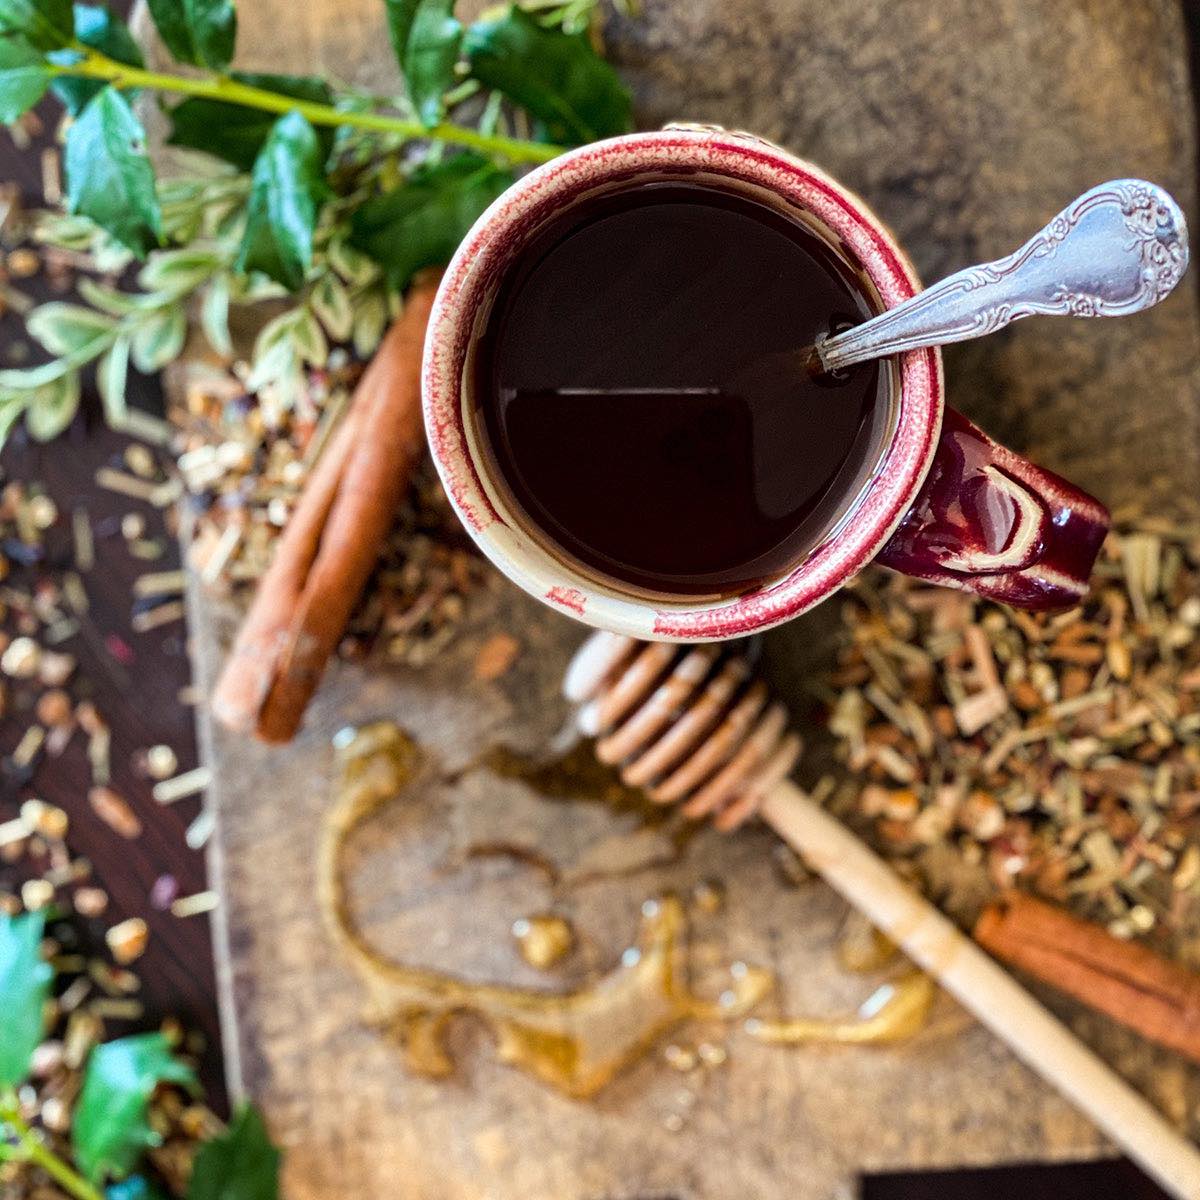 A brewed cup of Christmas Tea in a red mug with silver spoon sits on a wood cutting board with dried herb and greenery in the background.